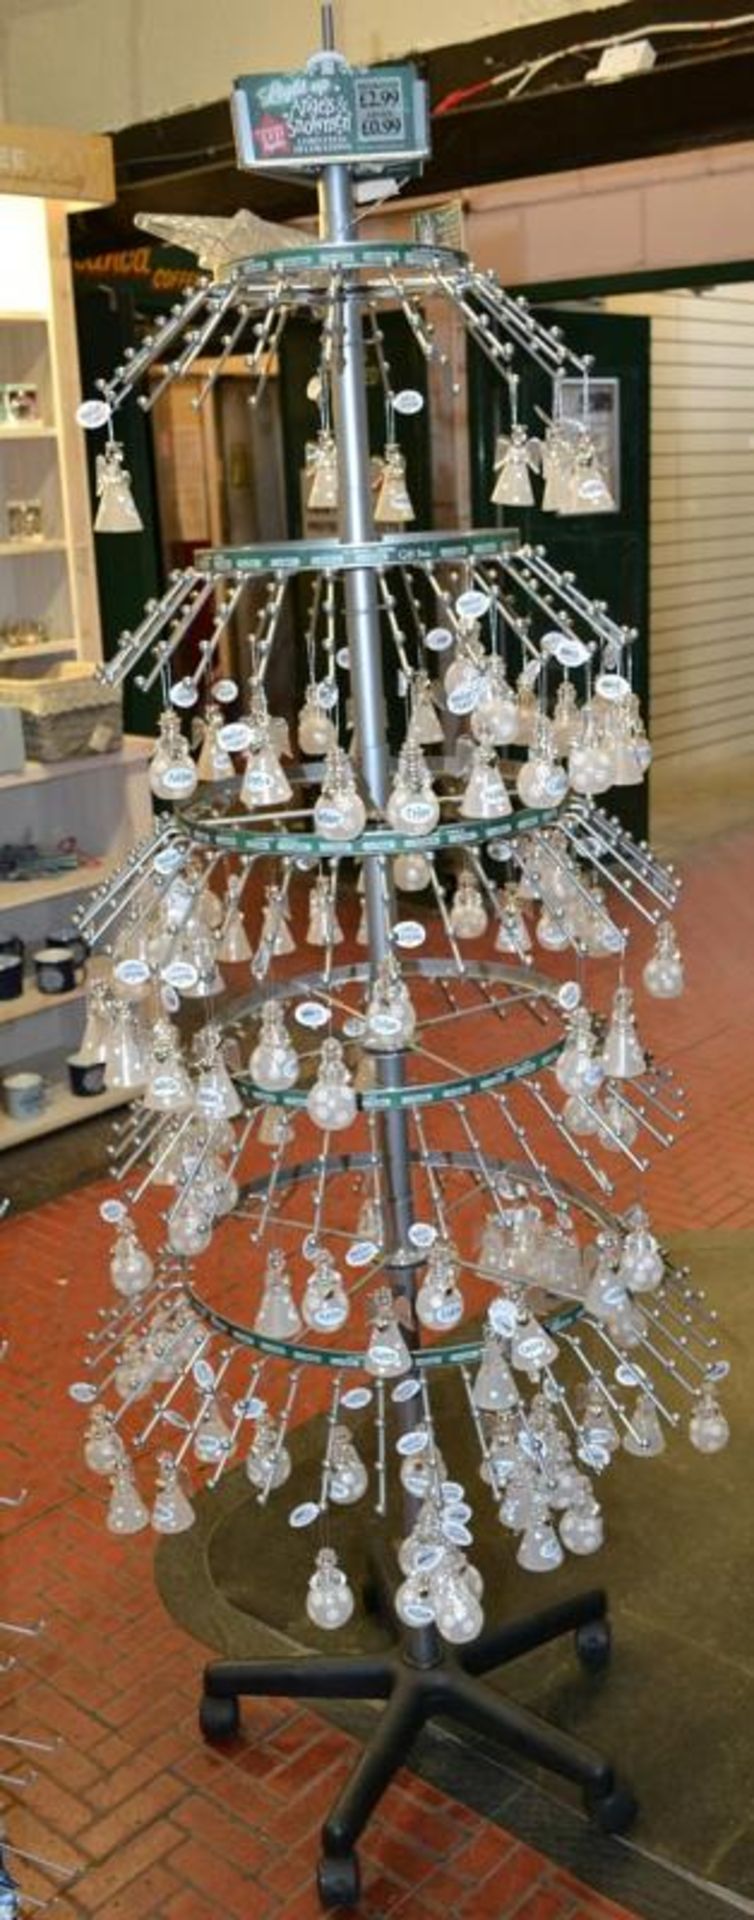 27 x Retail Carousel Display Stands With Approximately 2,800 Items of Resale Stock - Includes - Image 18 of 61